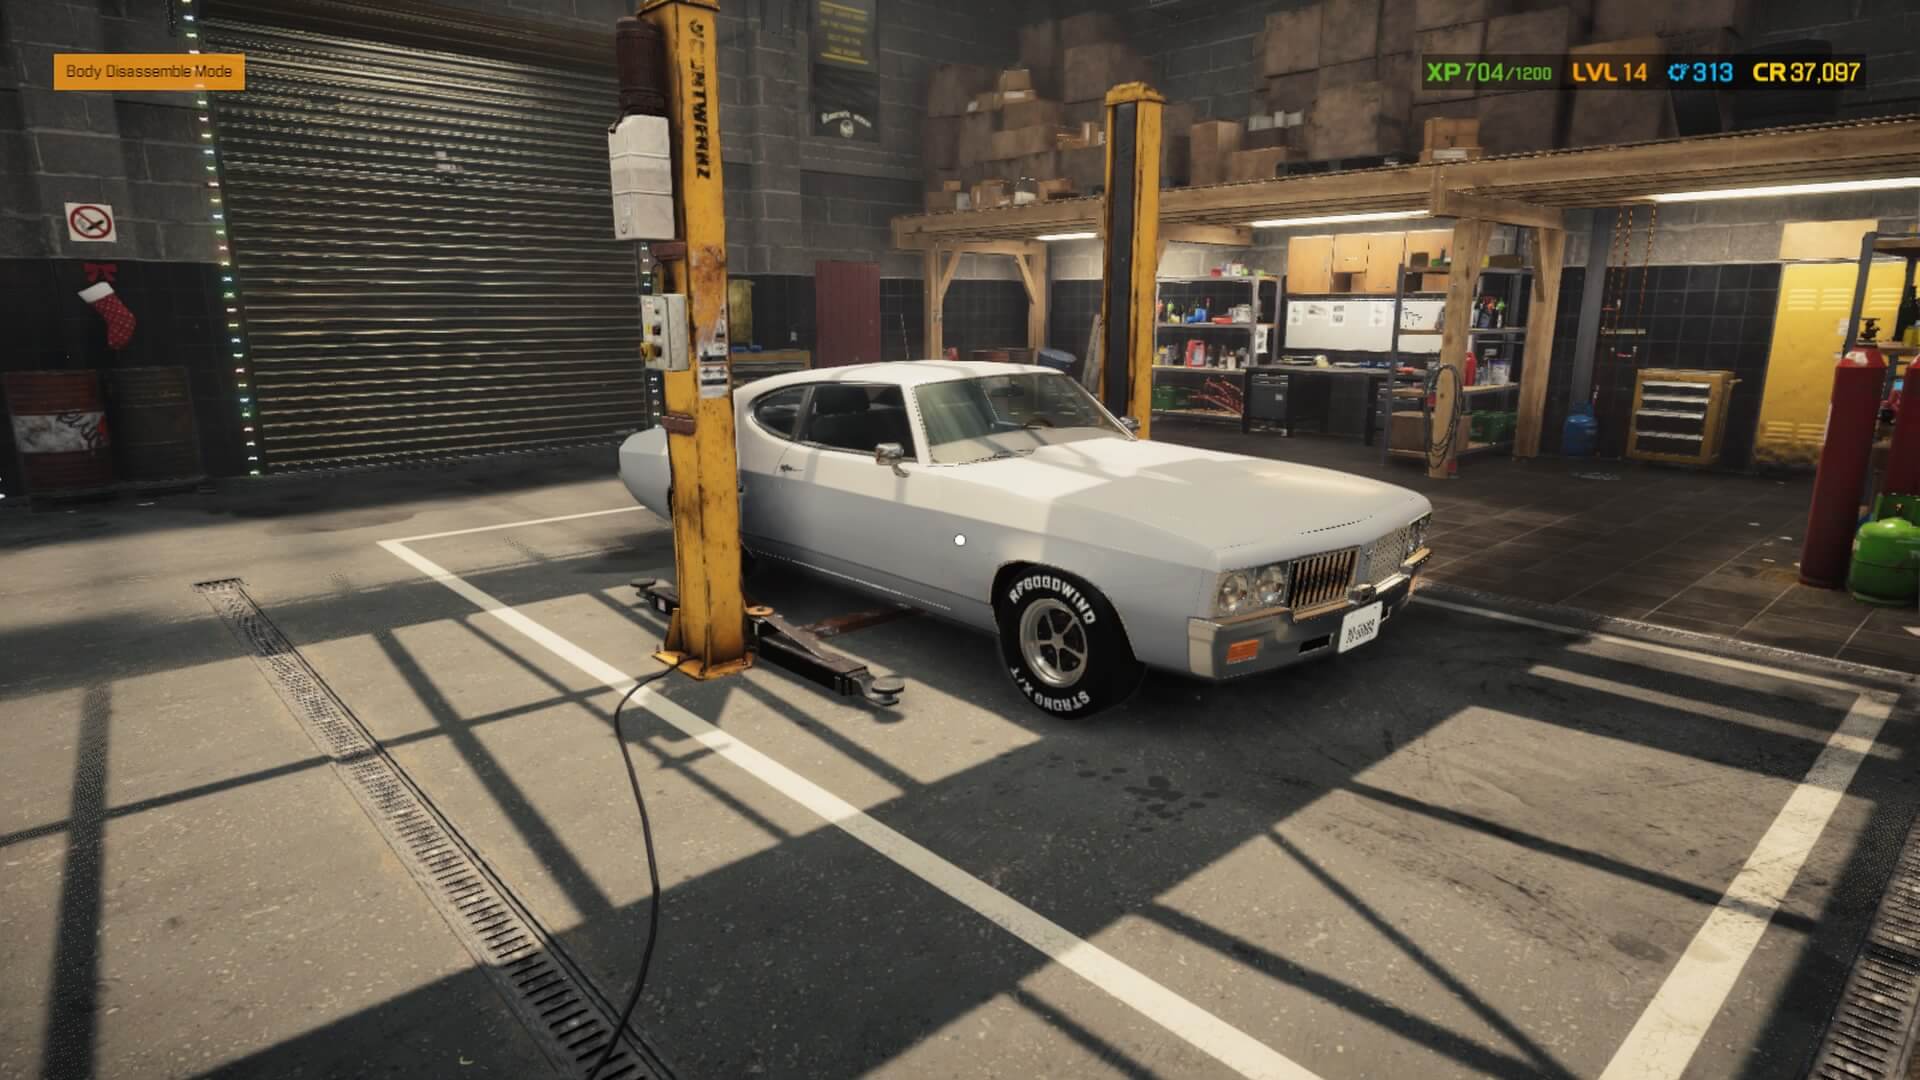 Screenshot showing the 1970 Edgewood Hellcat after work was done